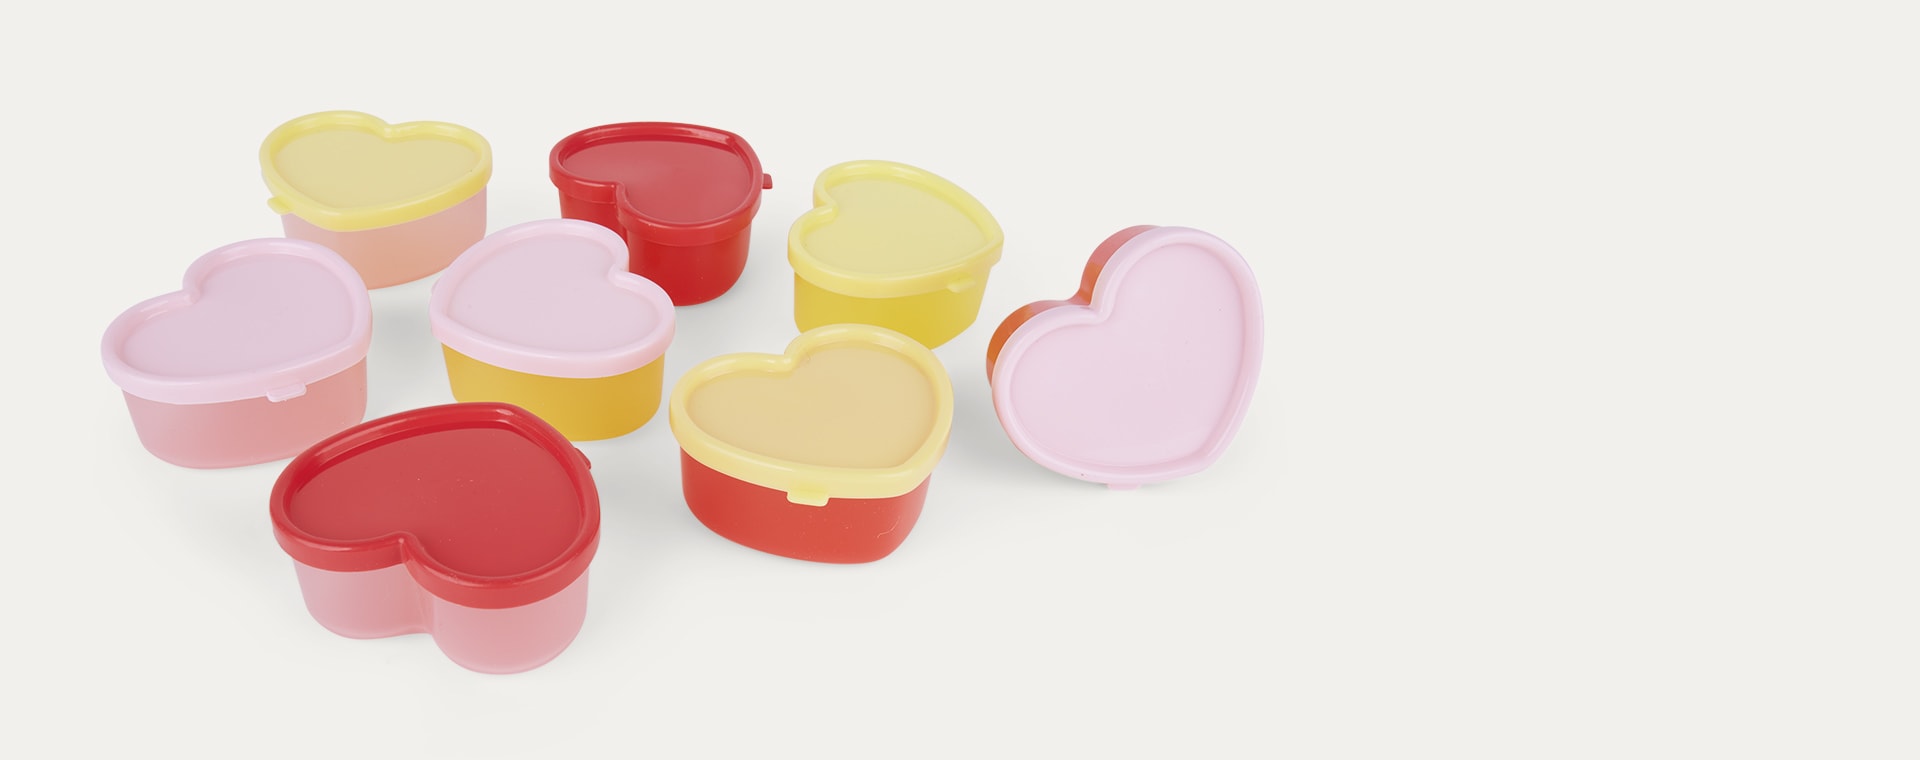 Multi Rice Heart Shaped Food Boxes